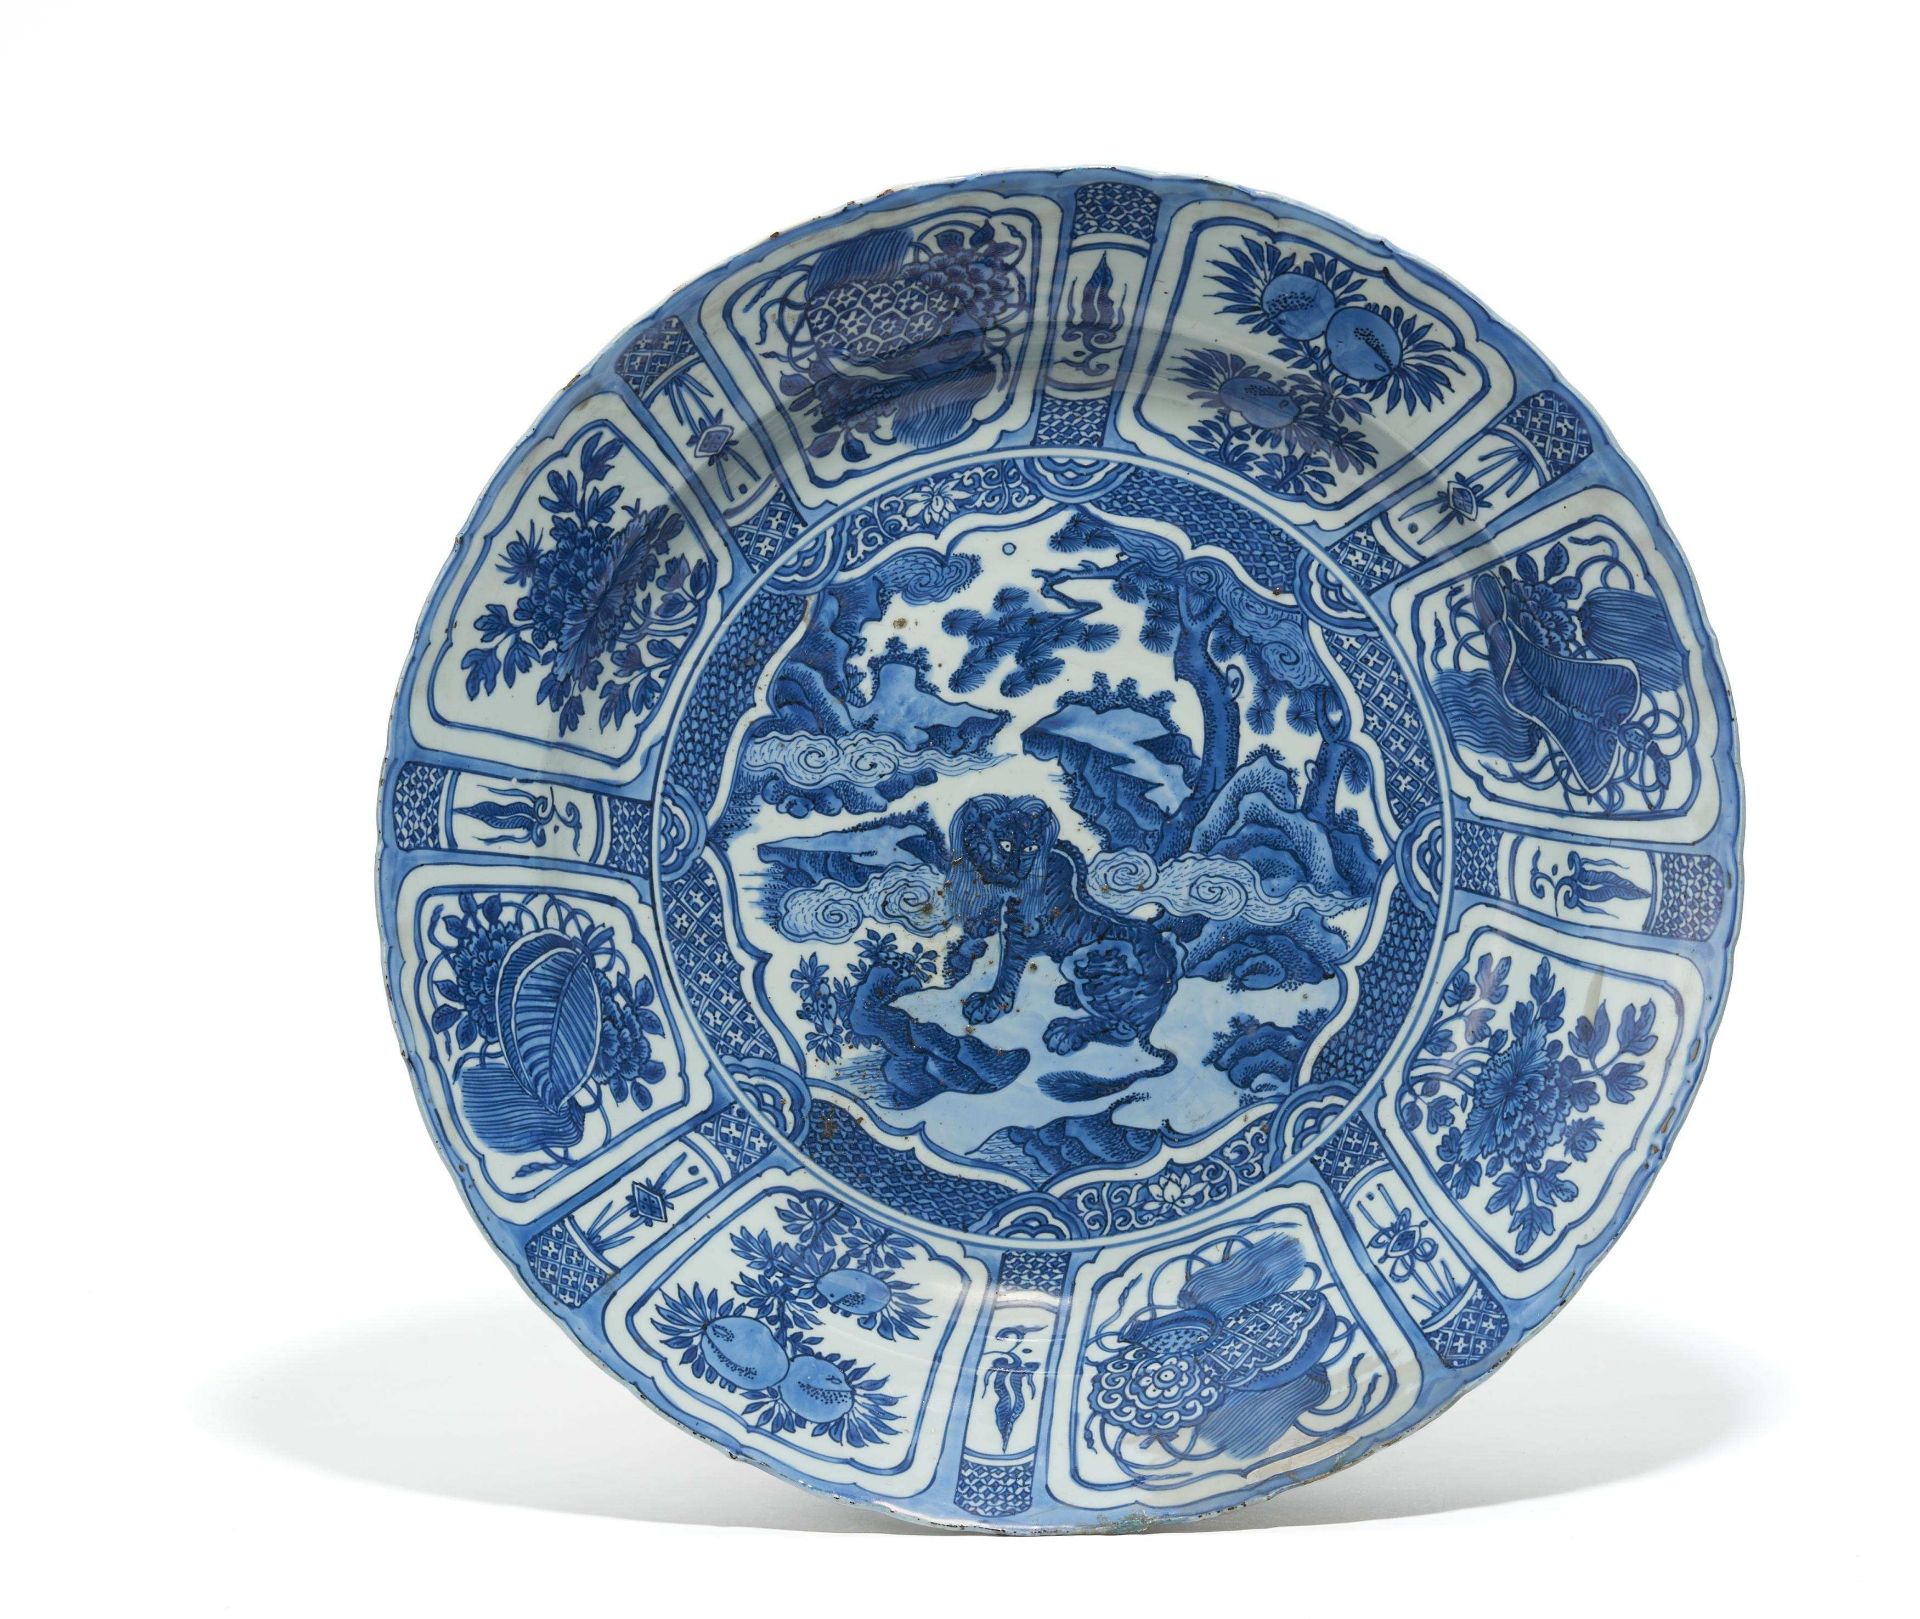 BIG PLATE WITH LION. China. Ming dynasty. Wanli period (1573-1620). Porcelain, painted in shades